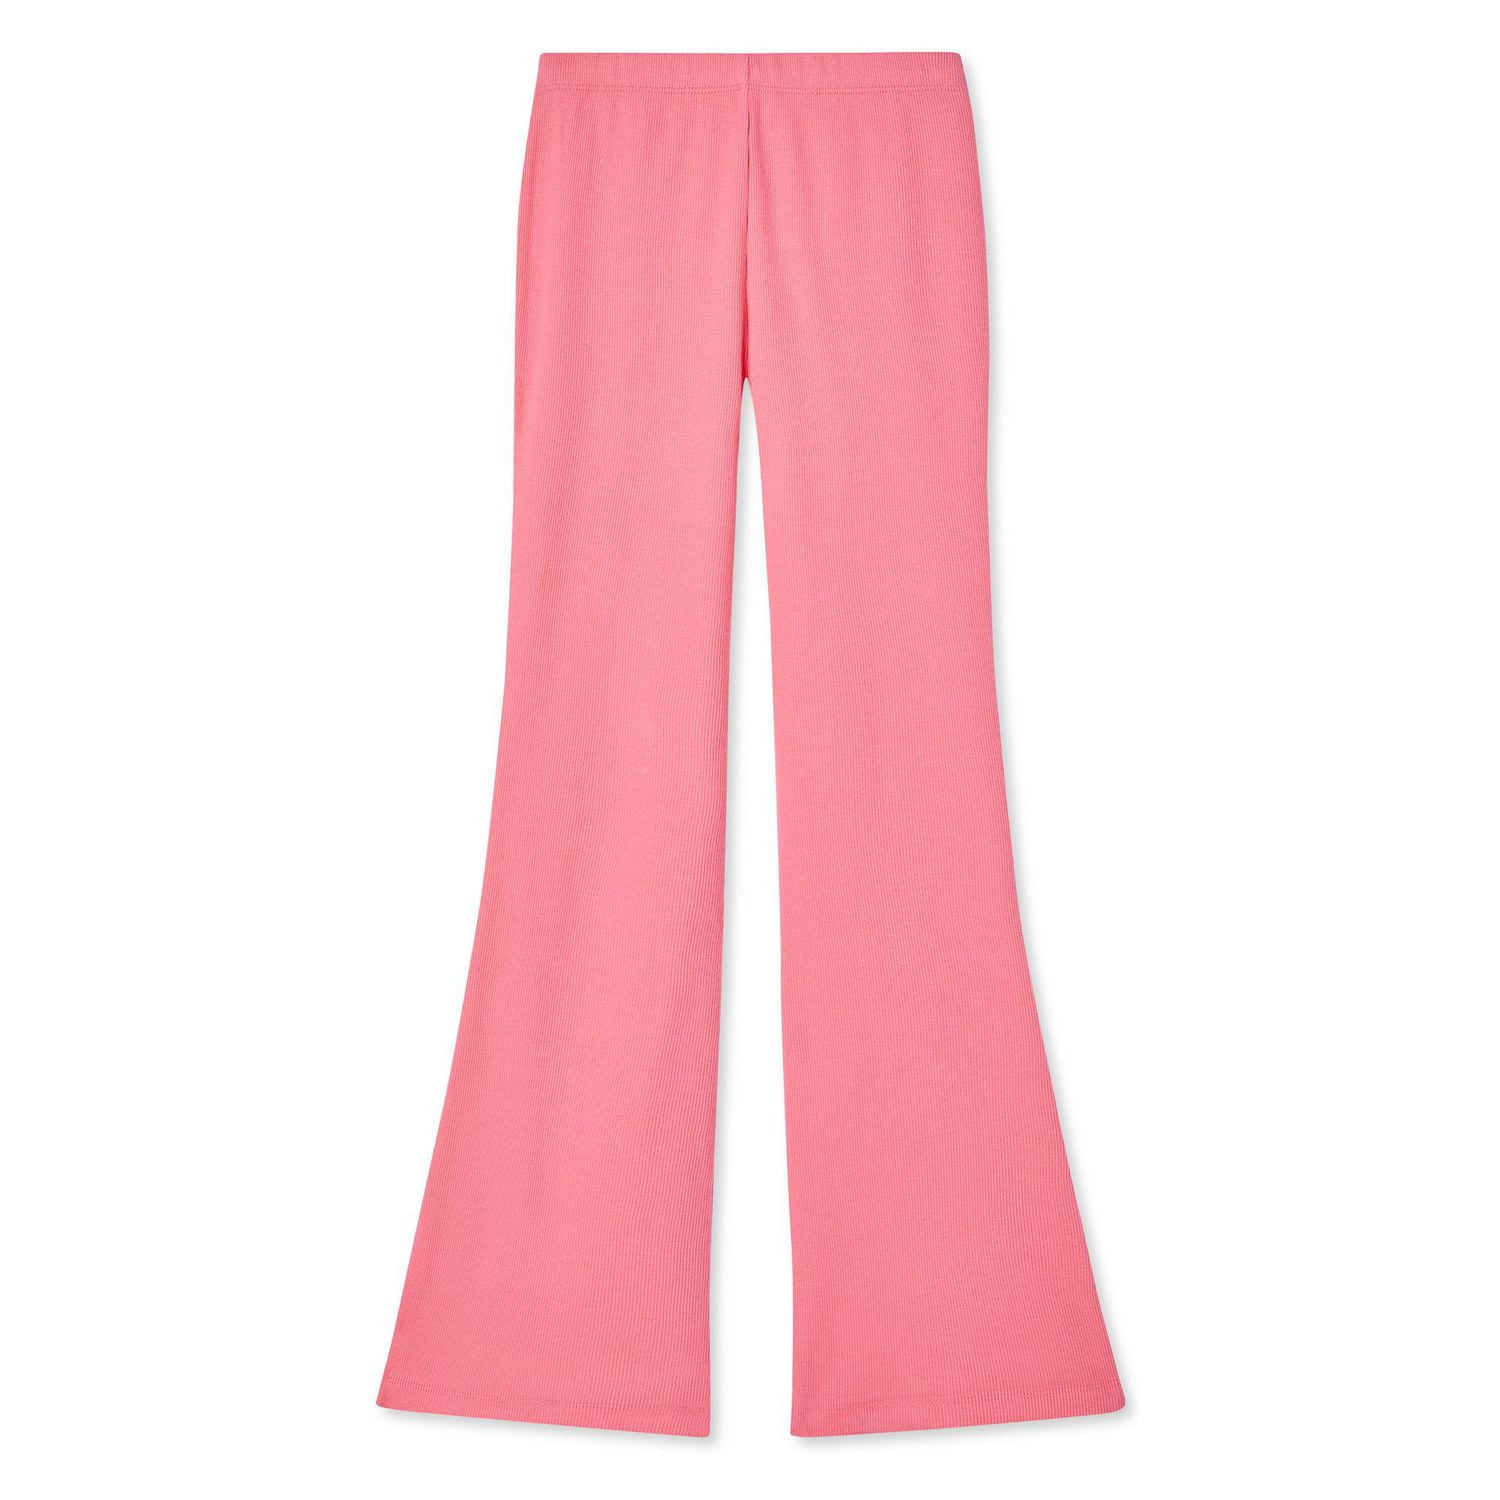 Relaxed Flare Lounge Pants by Cotton On Body Online